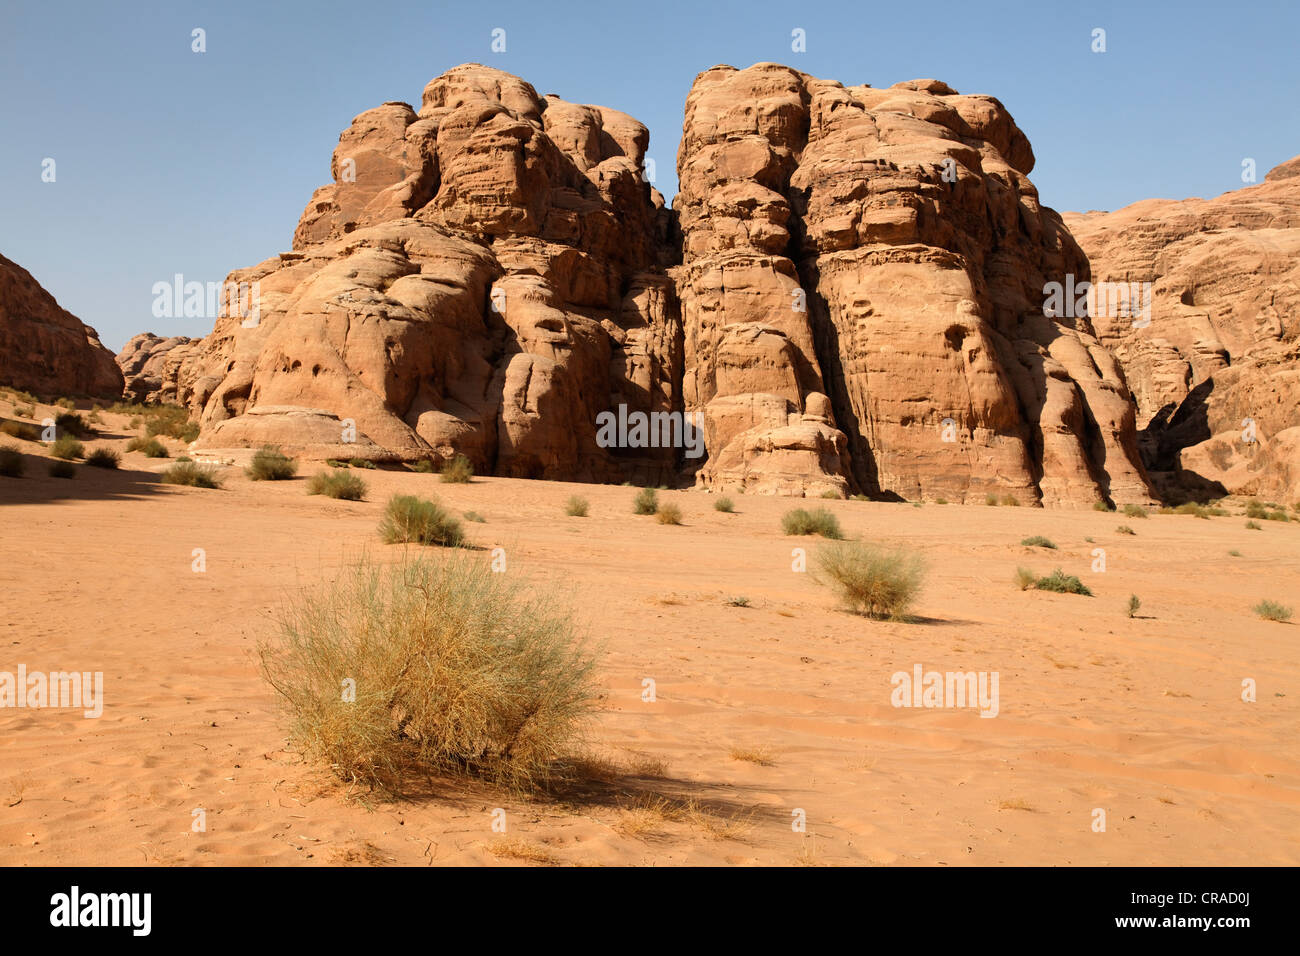 Wide plains, mountains and desert, Wadi Rum, Hashemite Kingdom of Jordan, Middle East, Asia Stock Photo